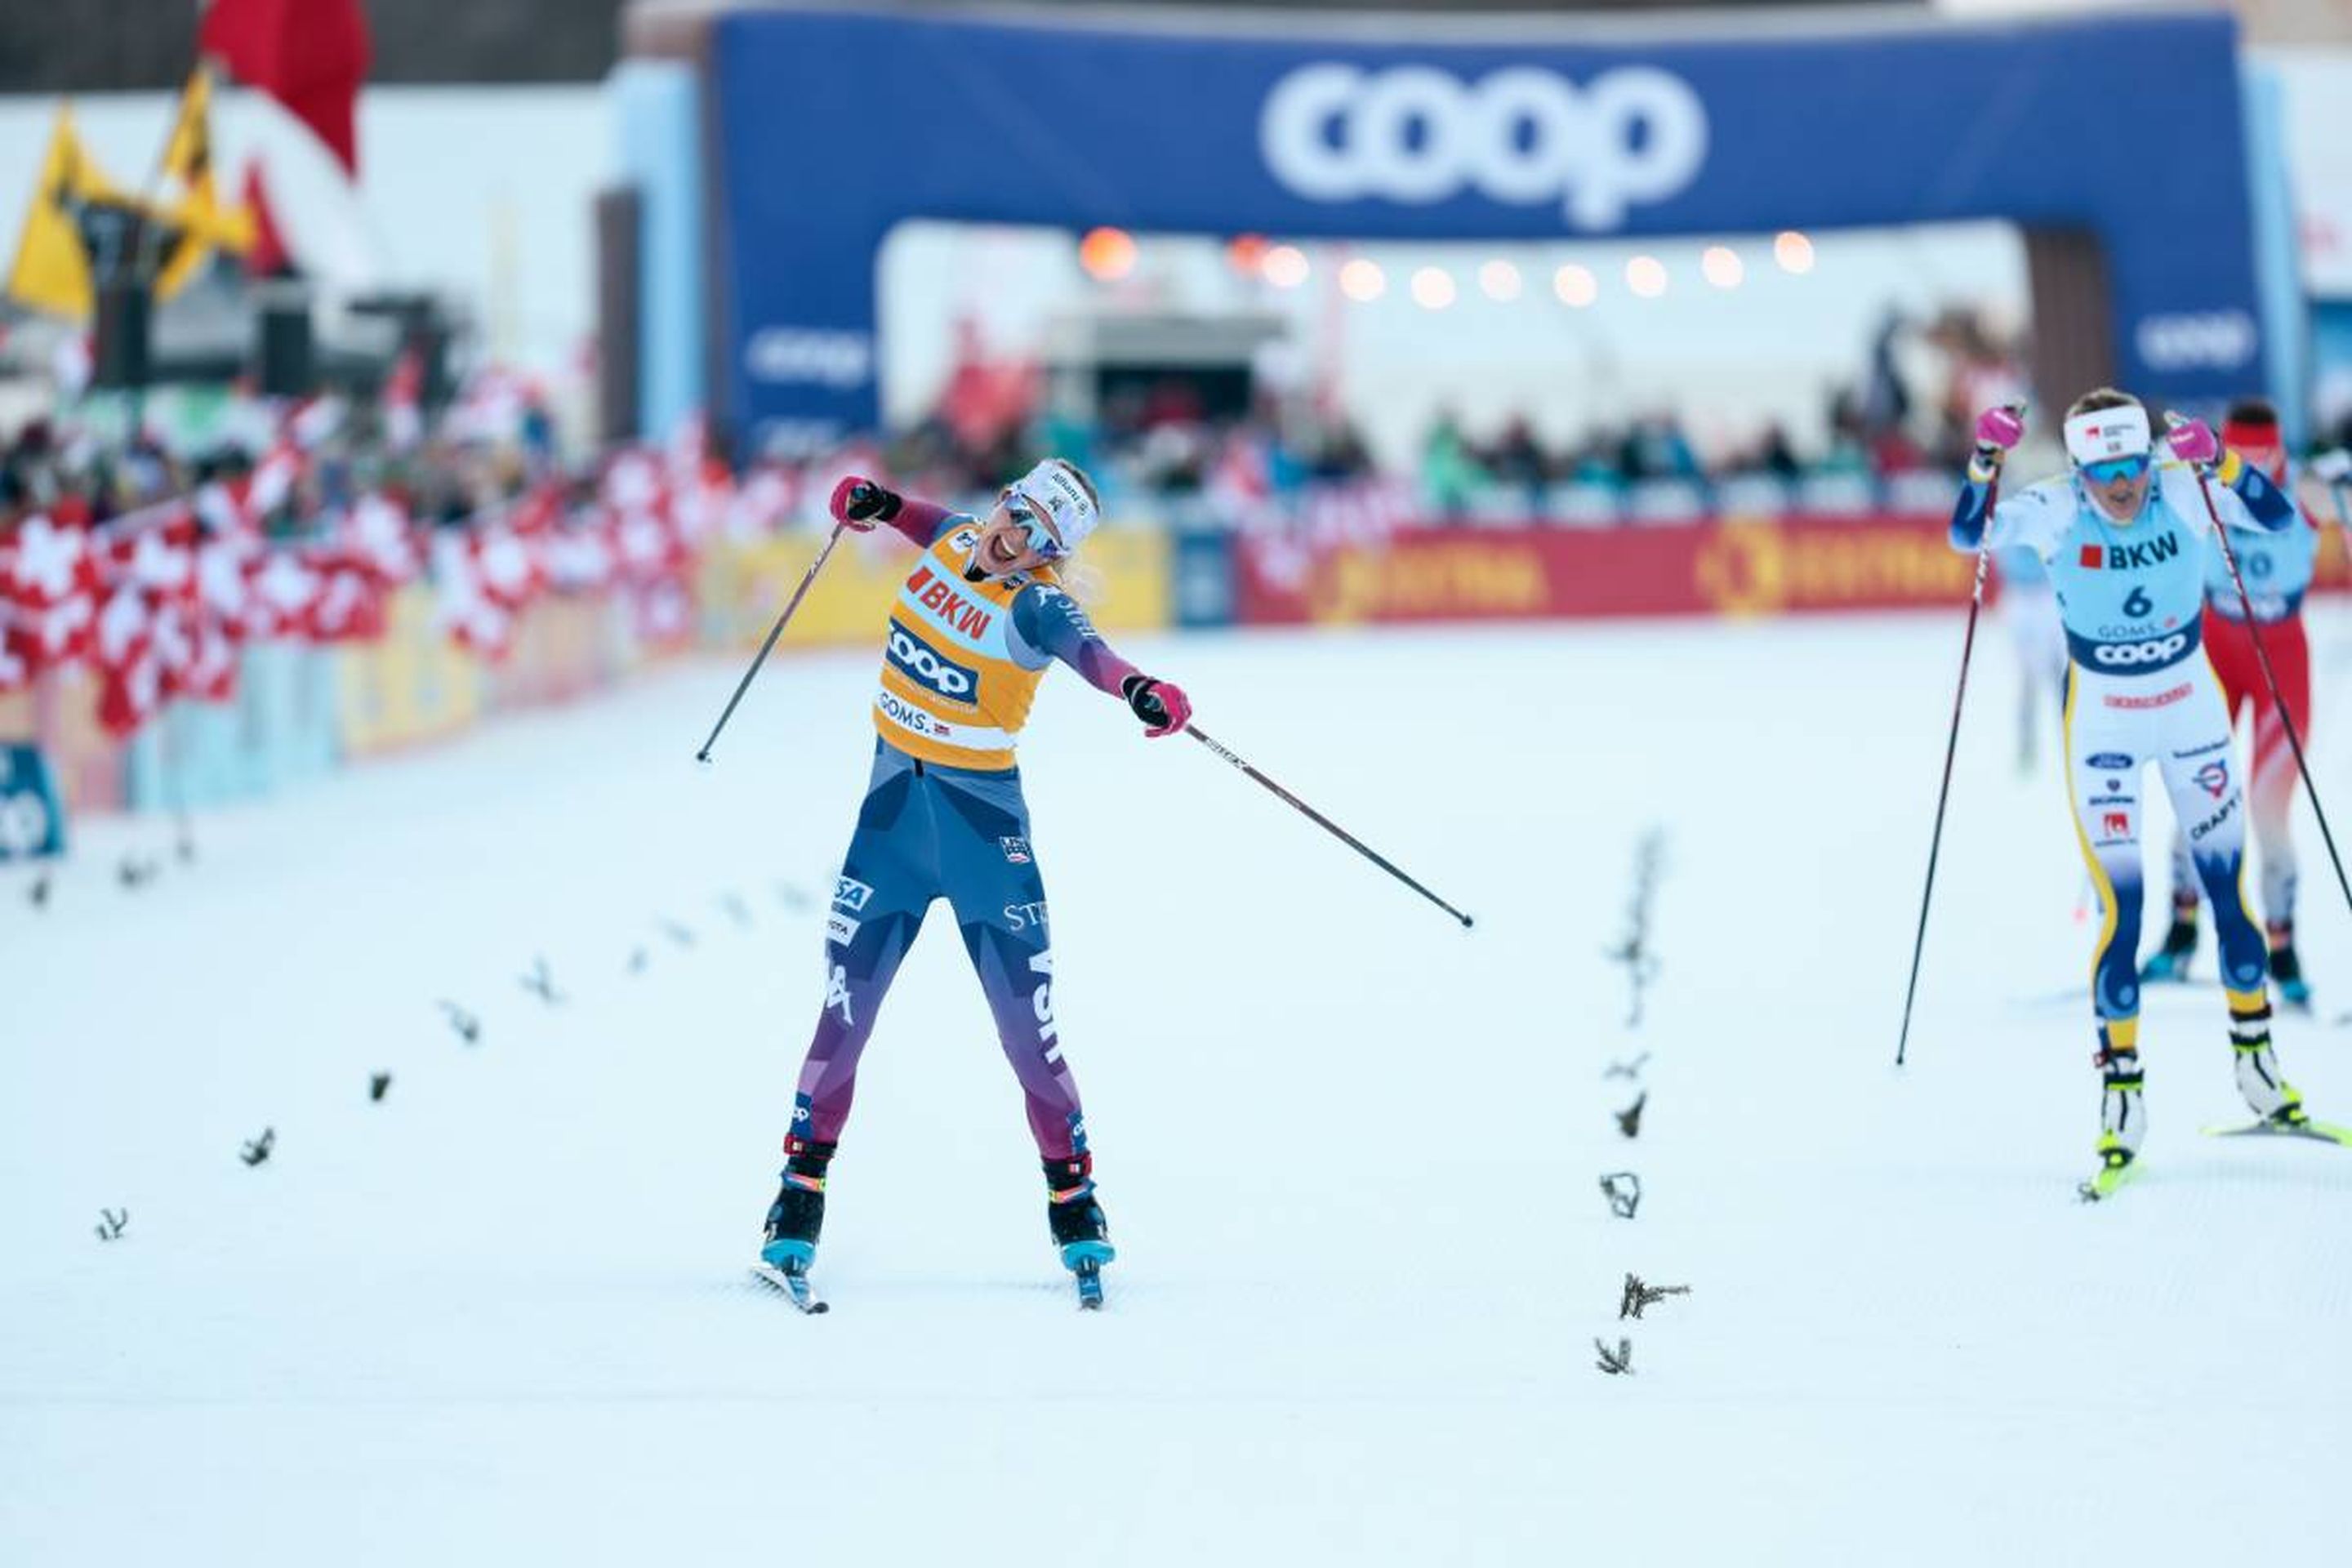 An exhausted Jessie Diggins wins the 20km mass start free in Goms before Sweden's Frida Karlsson (right) after an impressive sprint, despite saying she did not feel her legs © NordicFocus